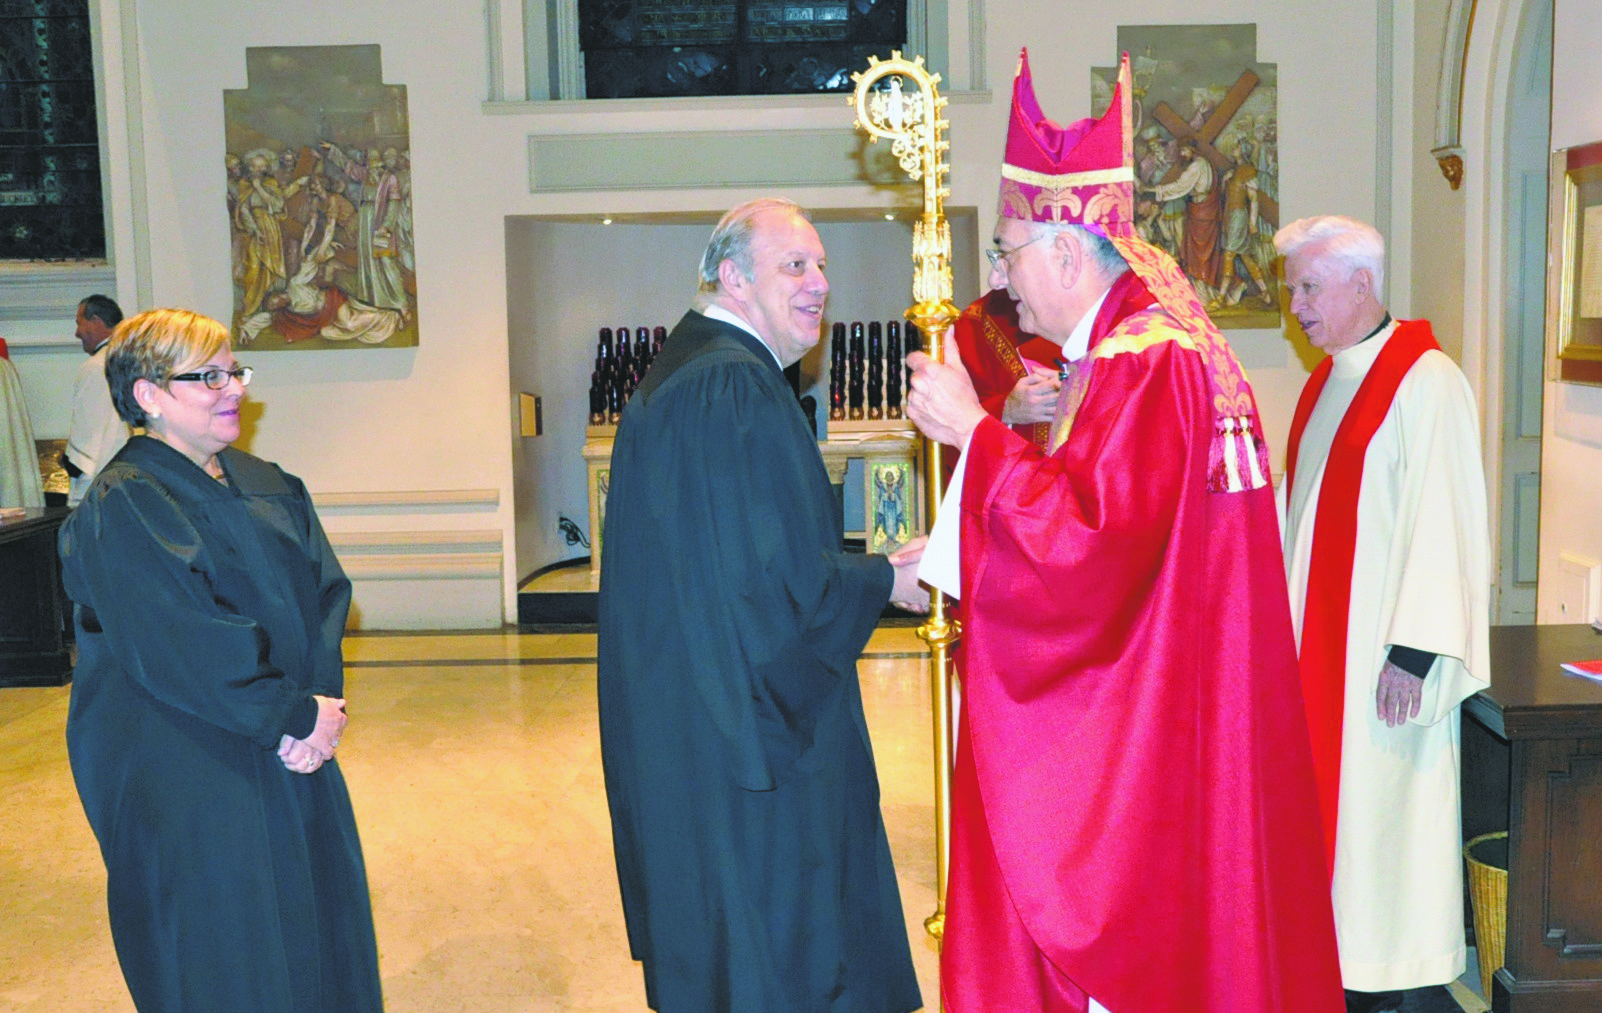 Bishop Nicholas DiMarzio greets Justices Robert Miller and Theresa Ciccotto, following the Red Mass at St. James Cathedral-Basilica, Downtown Brooklyn.